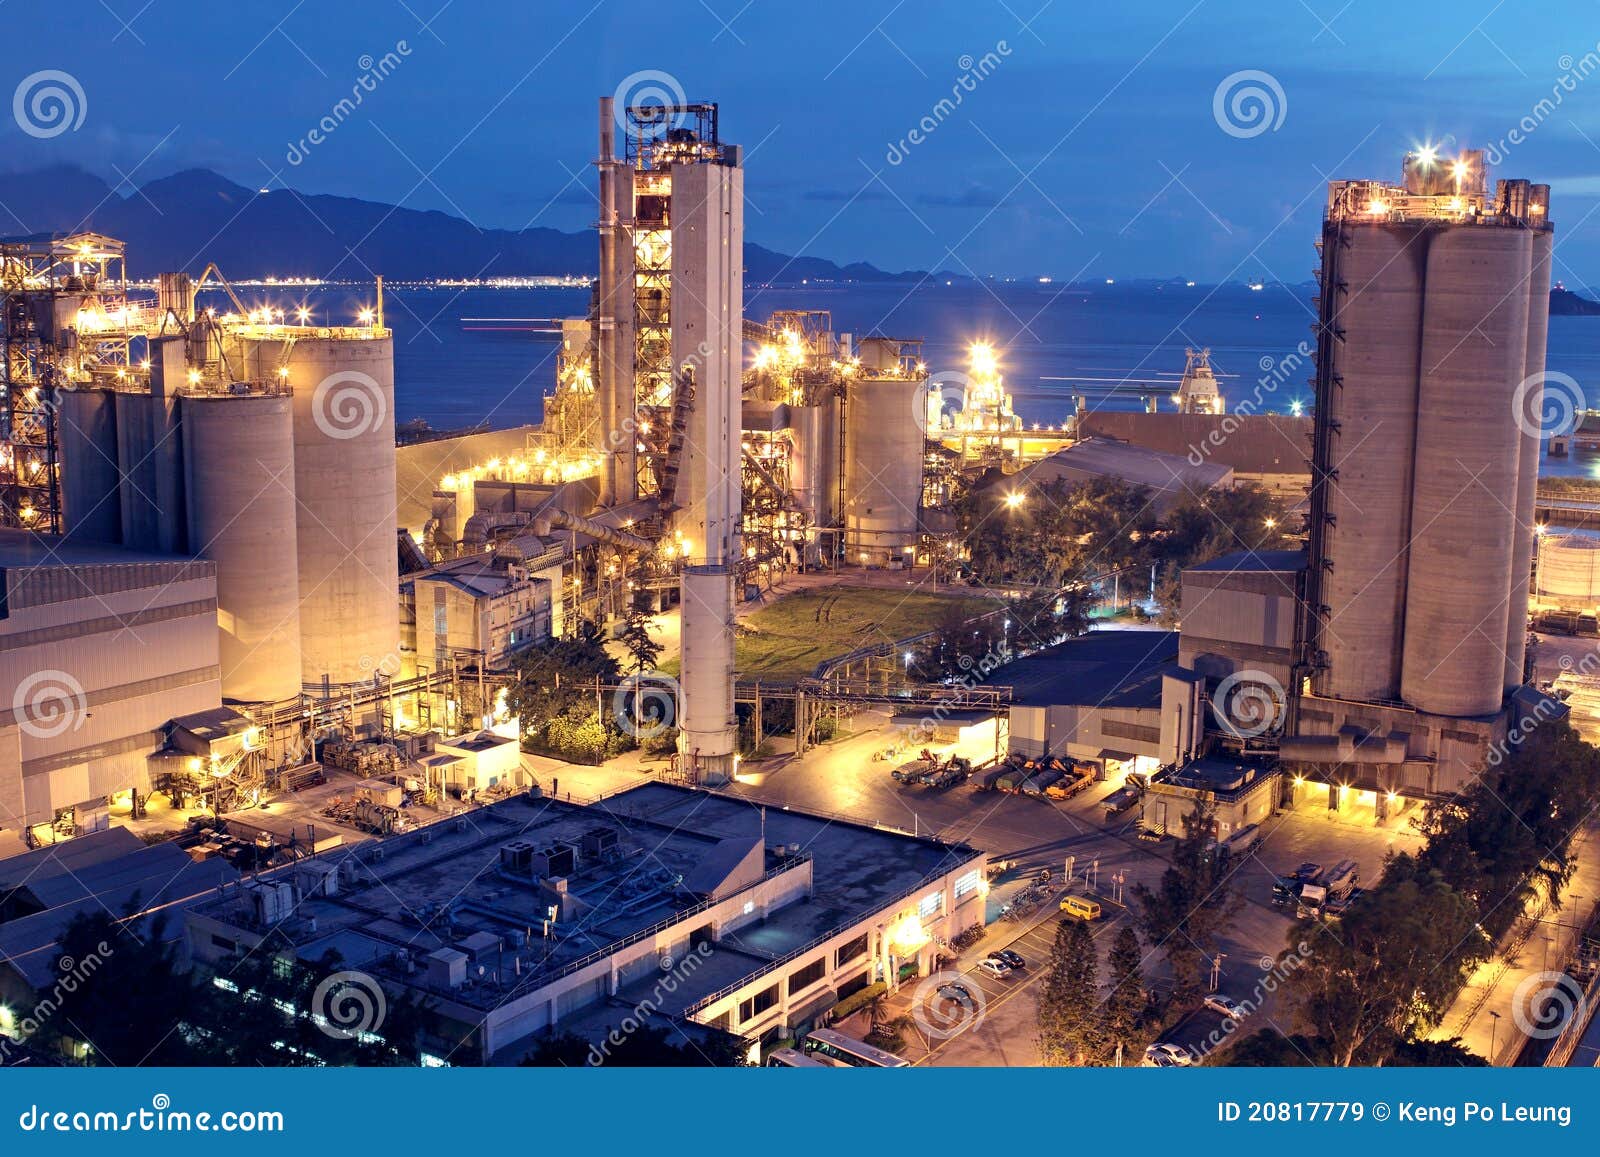 Cement Plant Royalty Free Stock Images - Image: 20817779